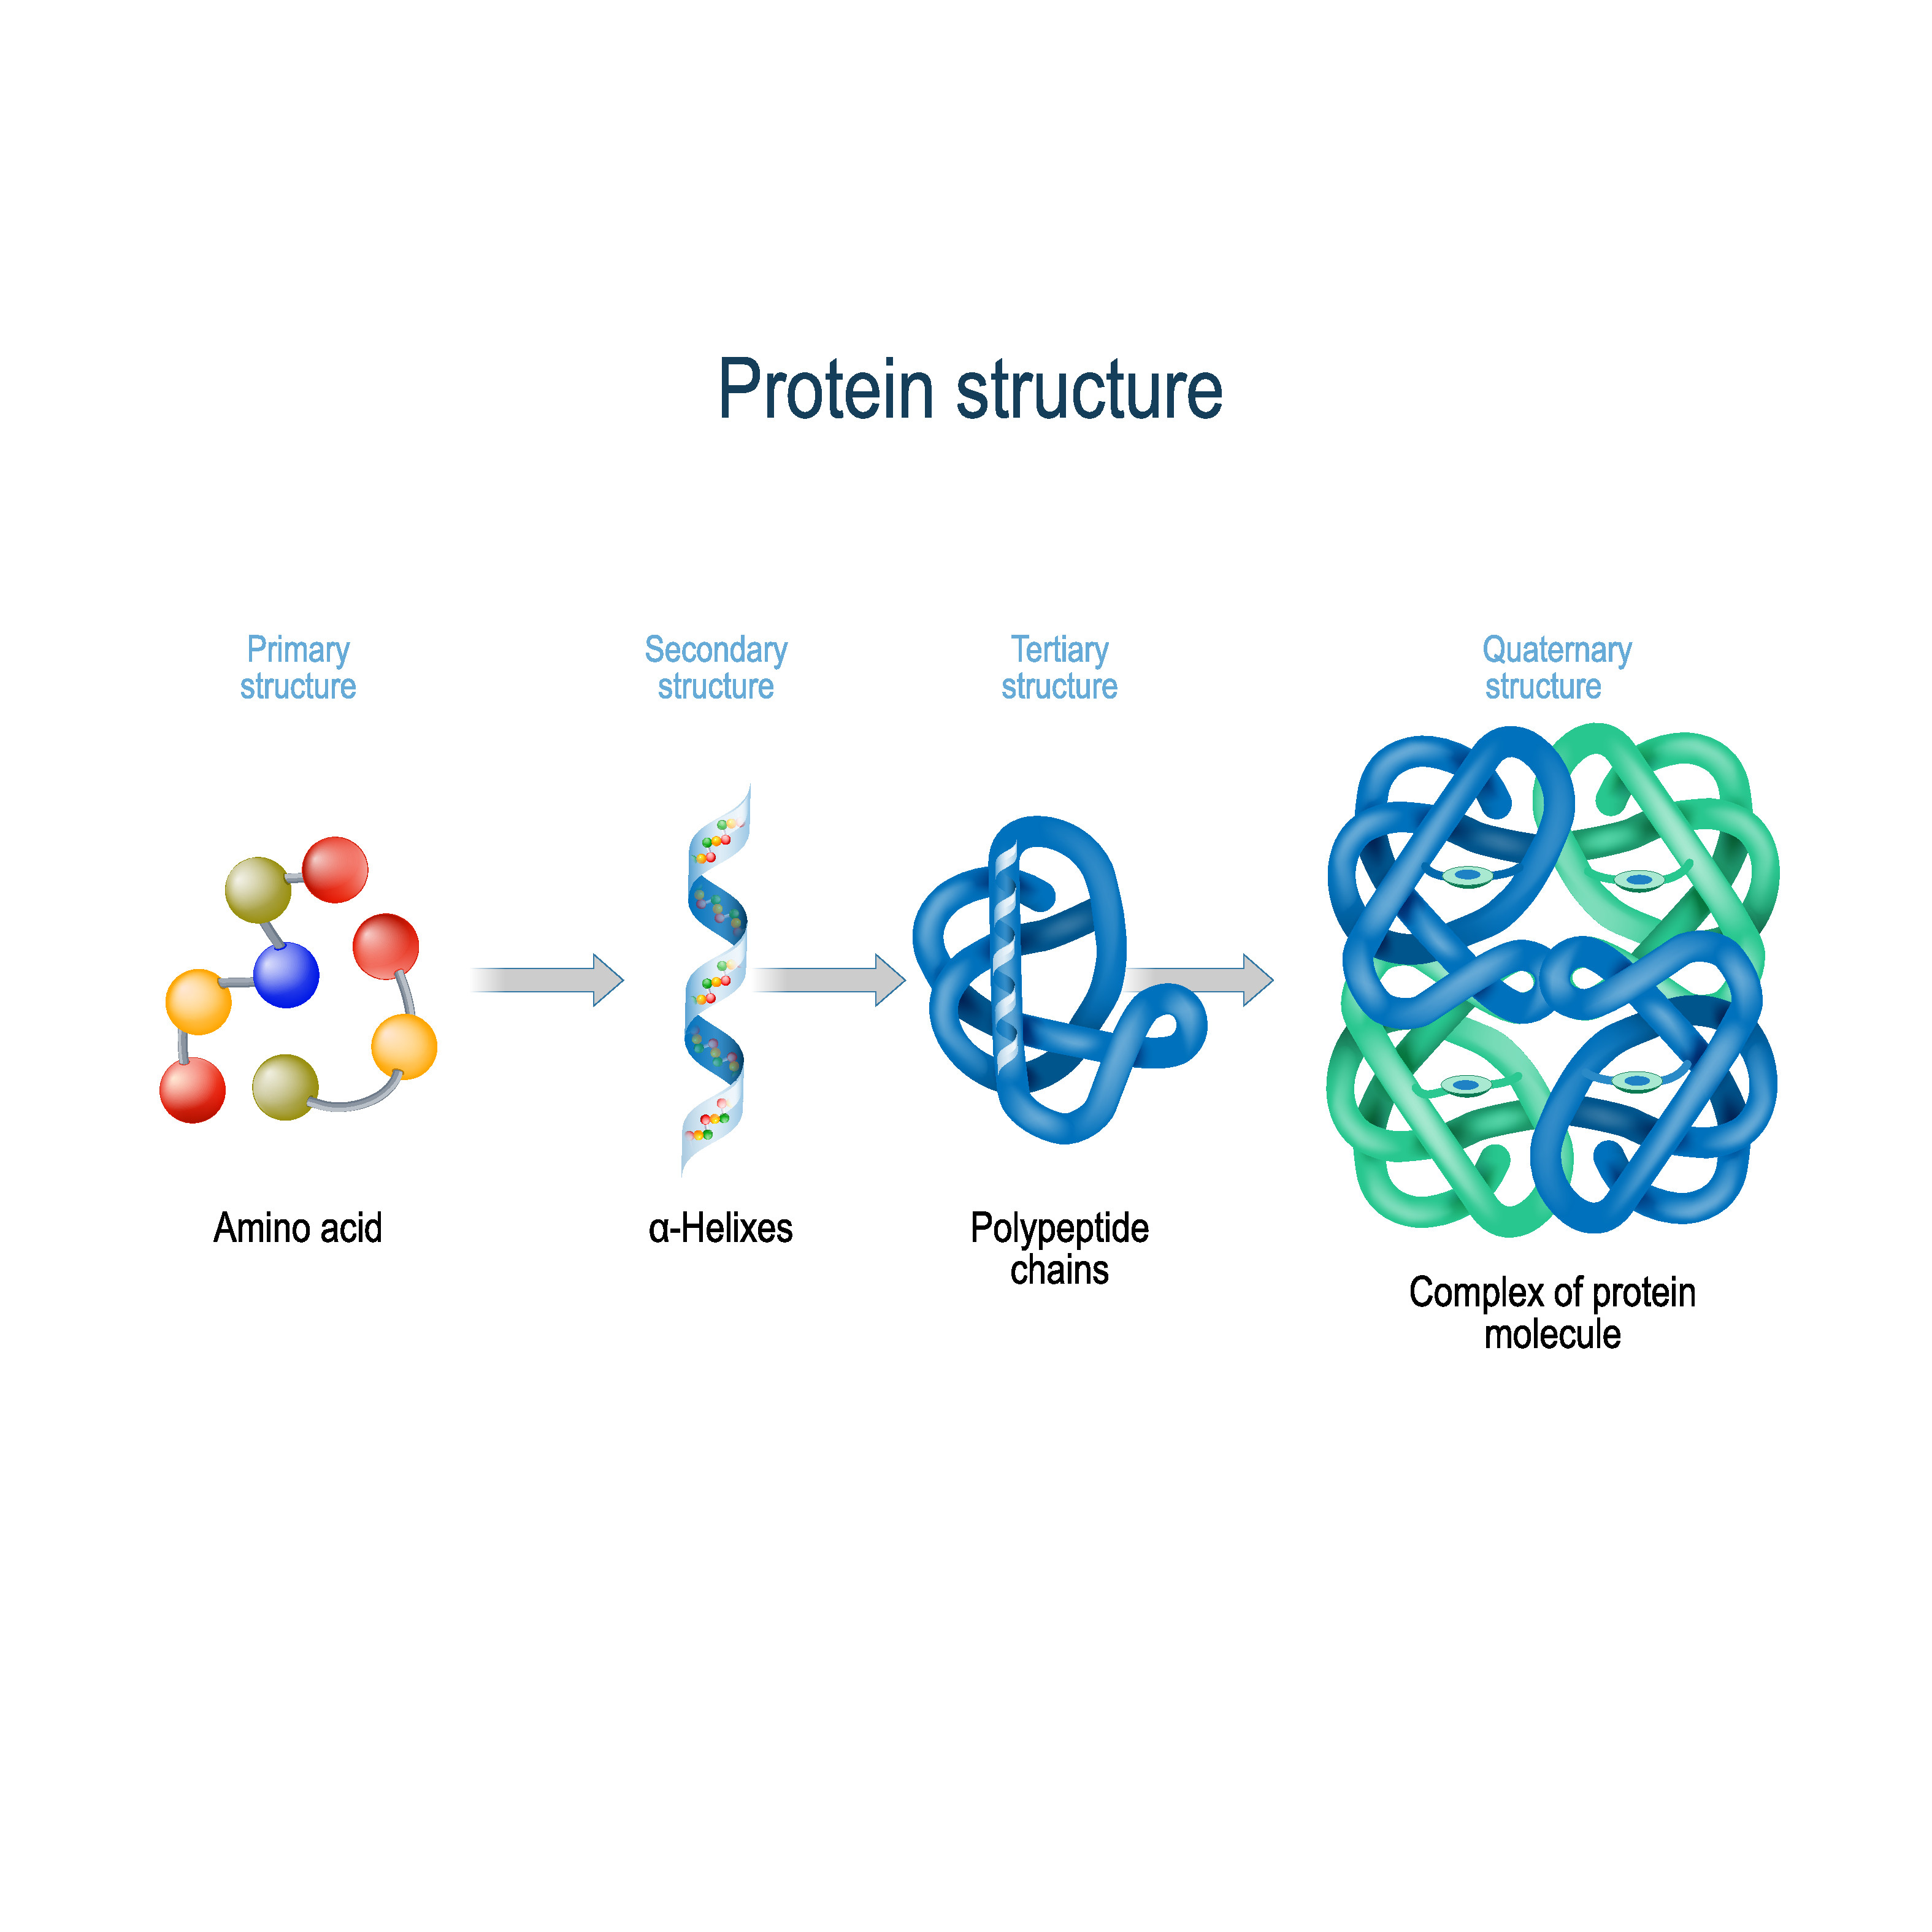 primary protein structure